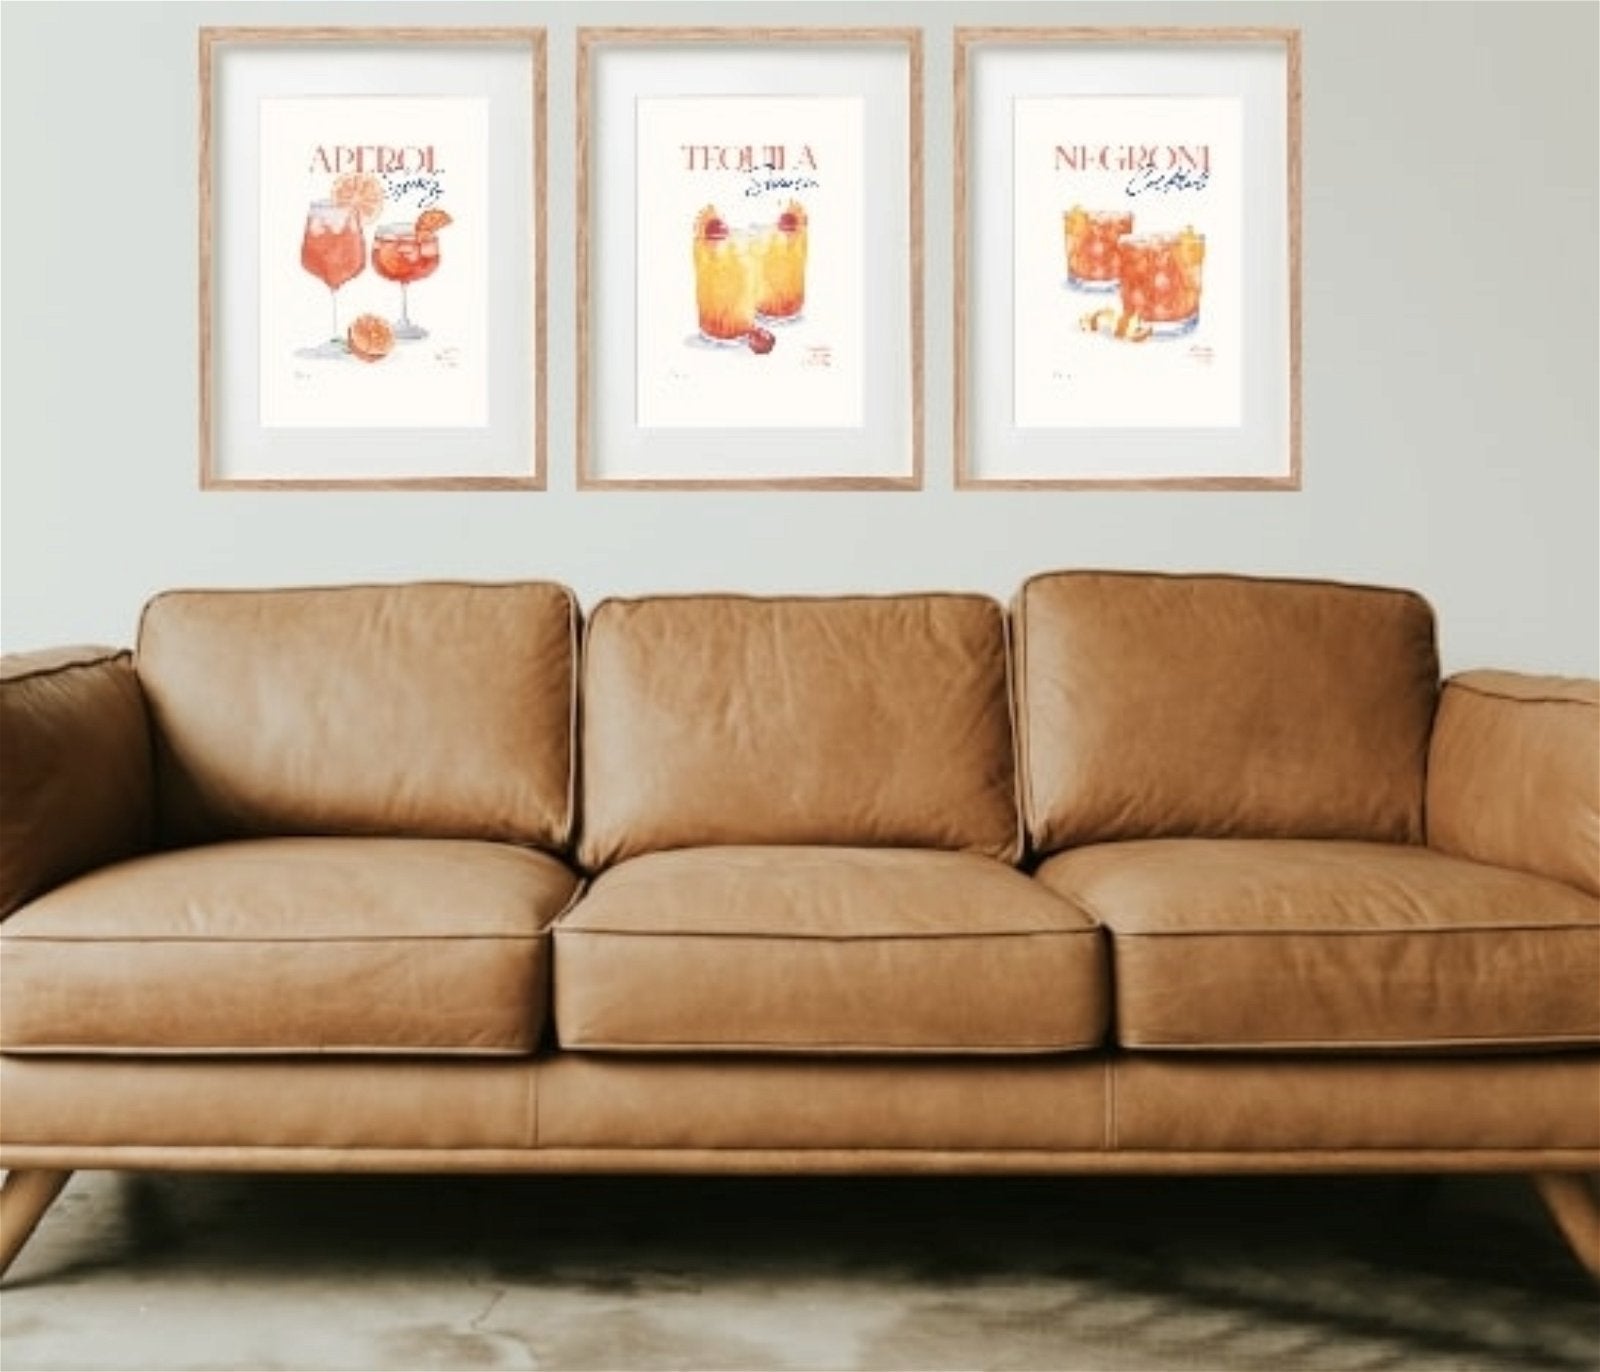 View Set of Three Cocktail Recipe Wall Art in Frames information